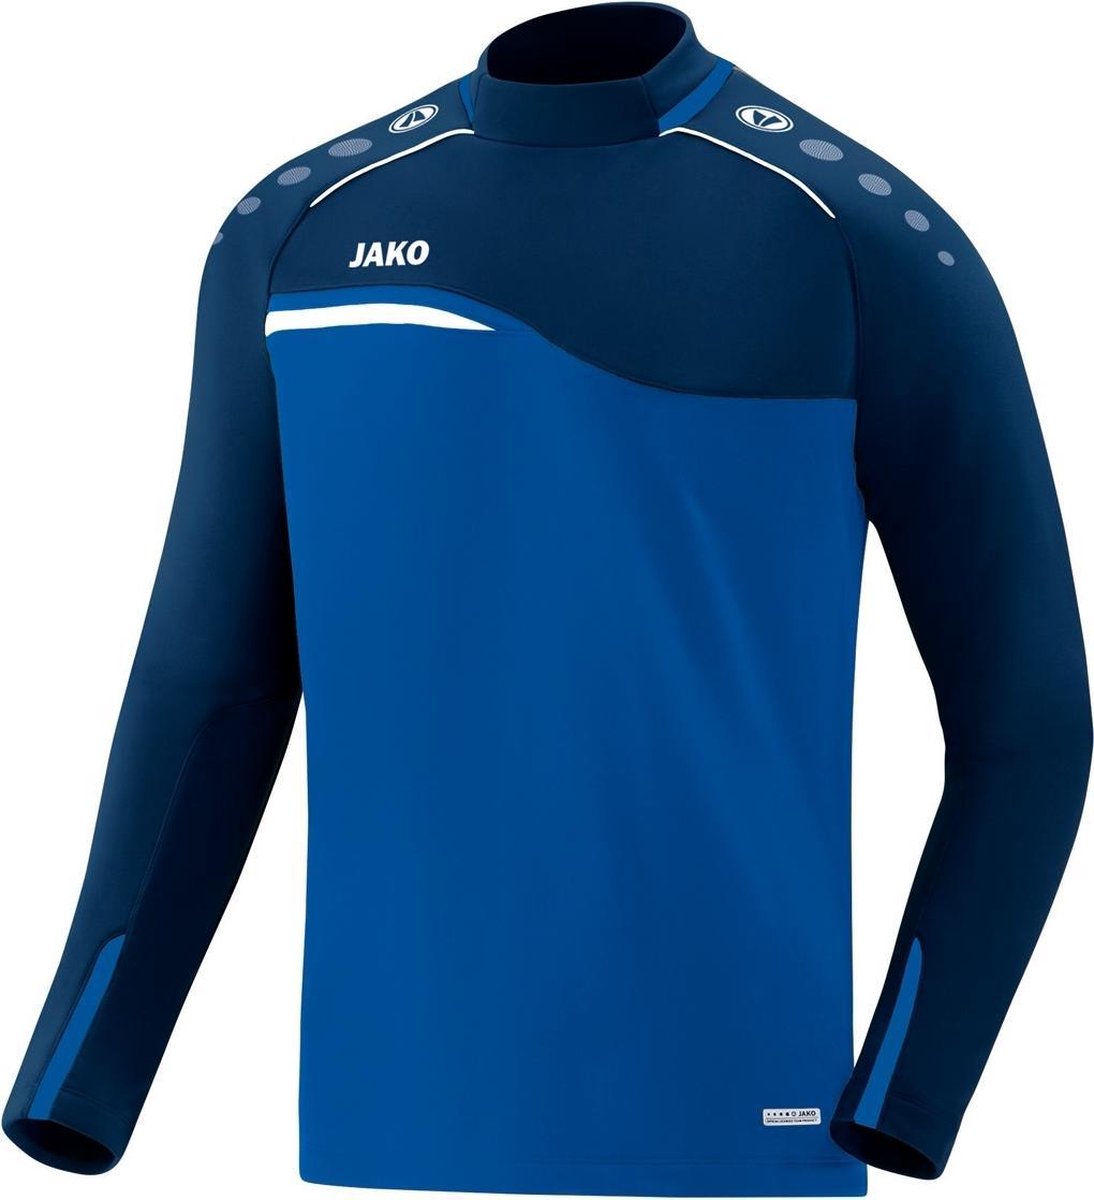 Jako - Sweater Competition 2.0 - Sweater Competition 2.0 - XL - royal/marine